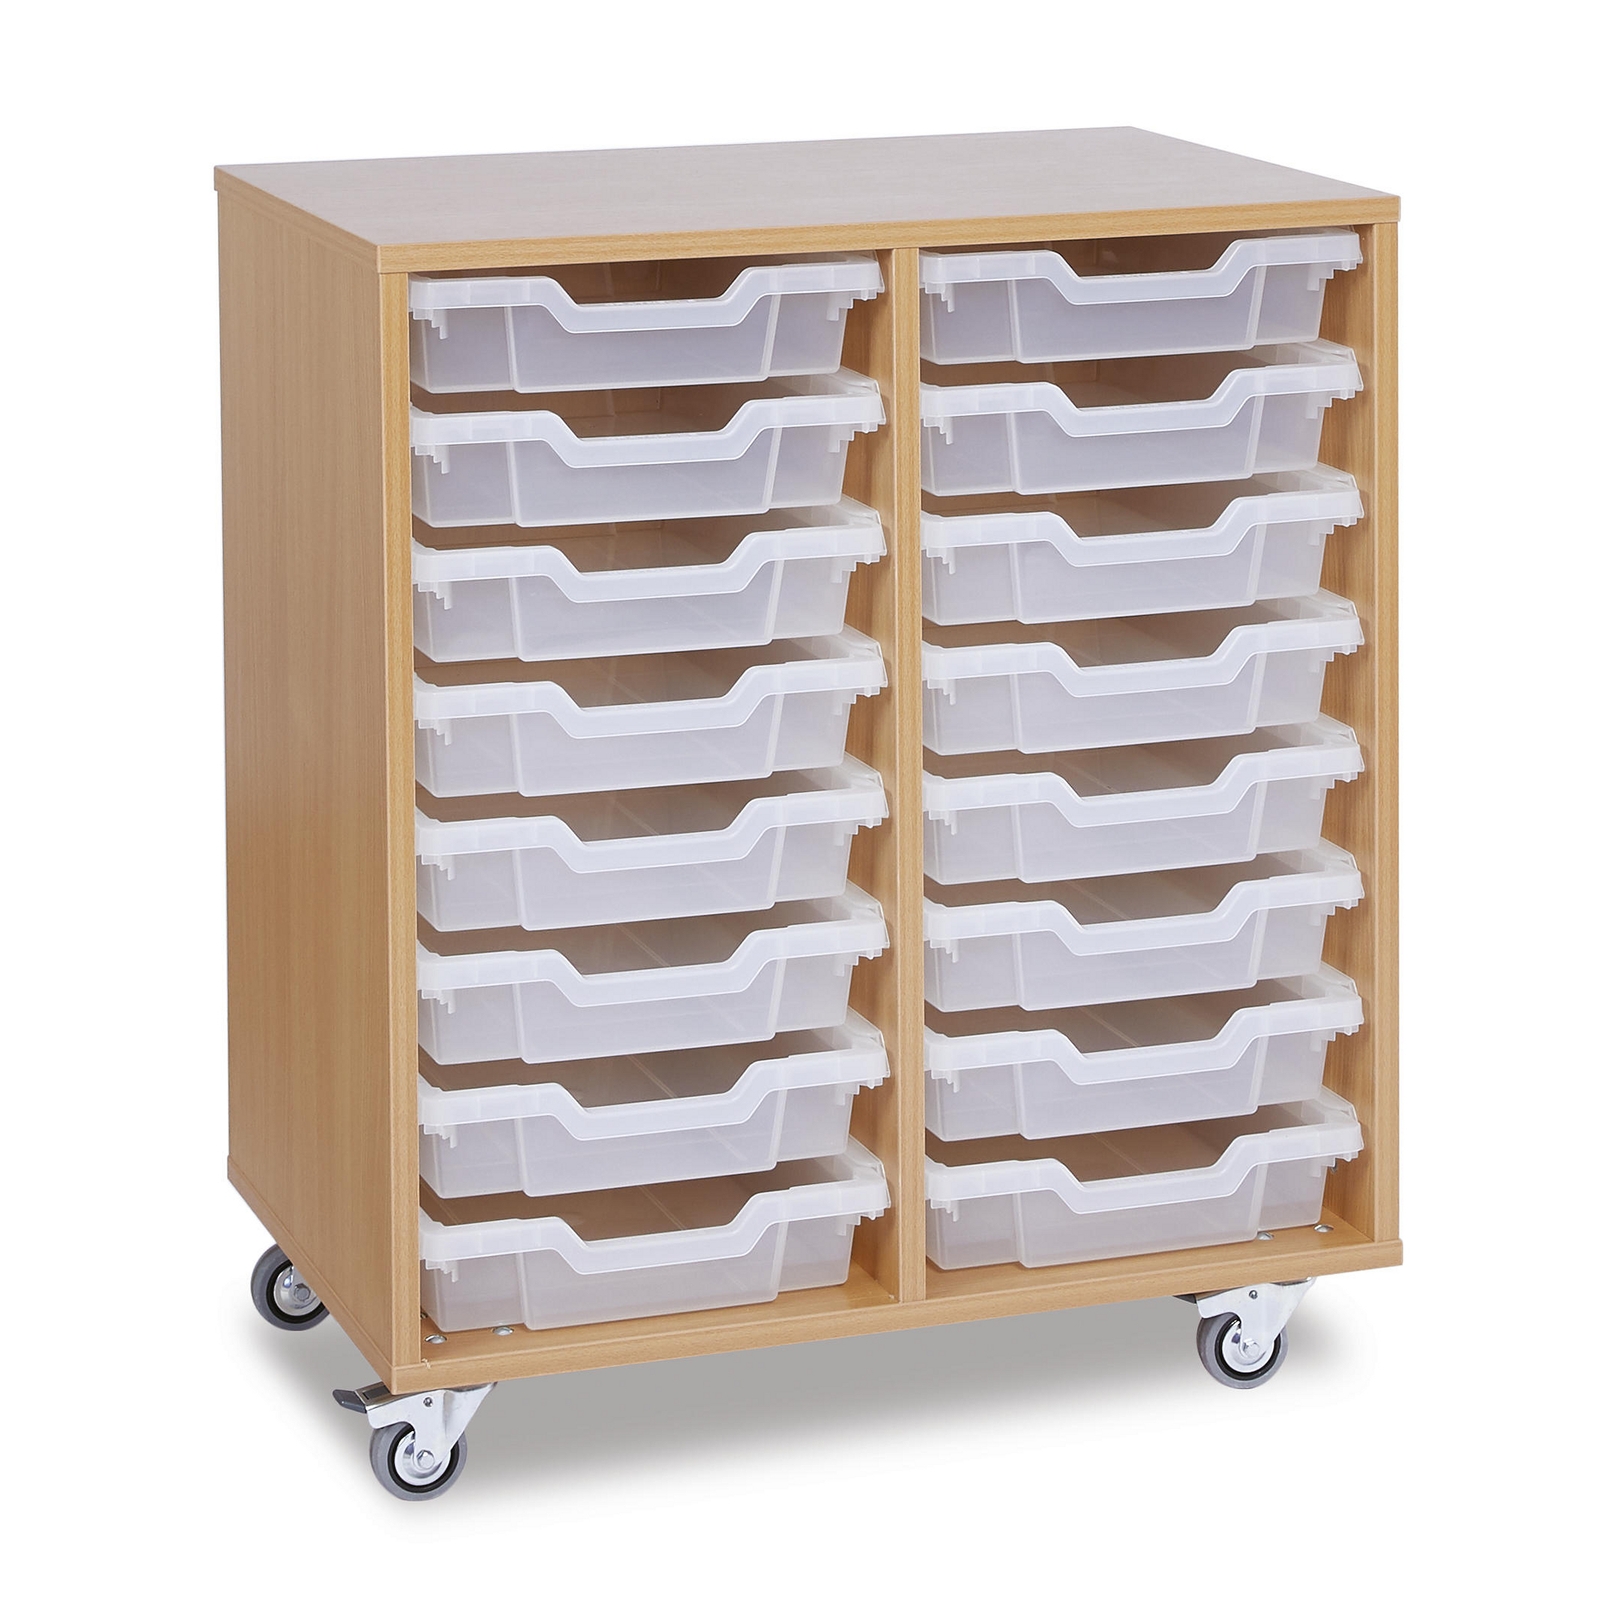 Tall Double Bay Units - Clear Trays Included